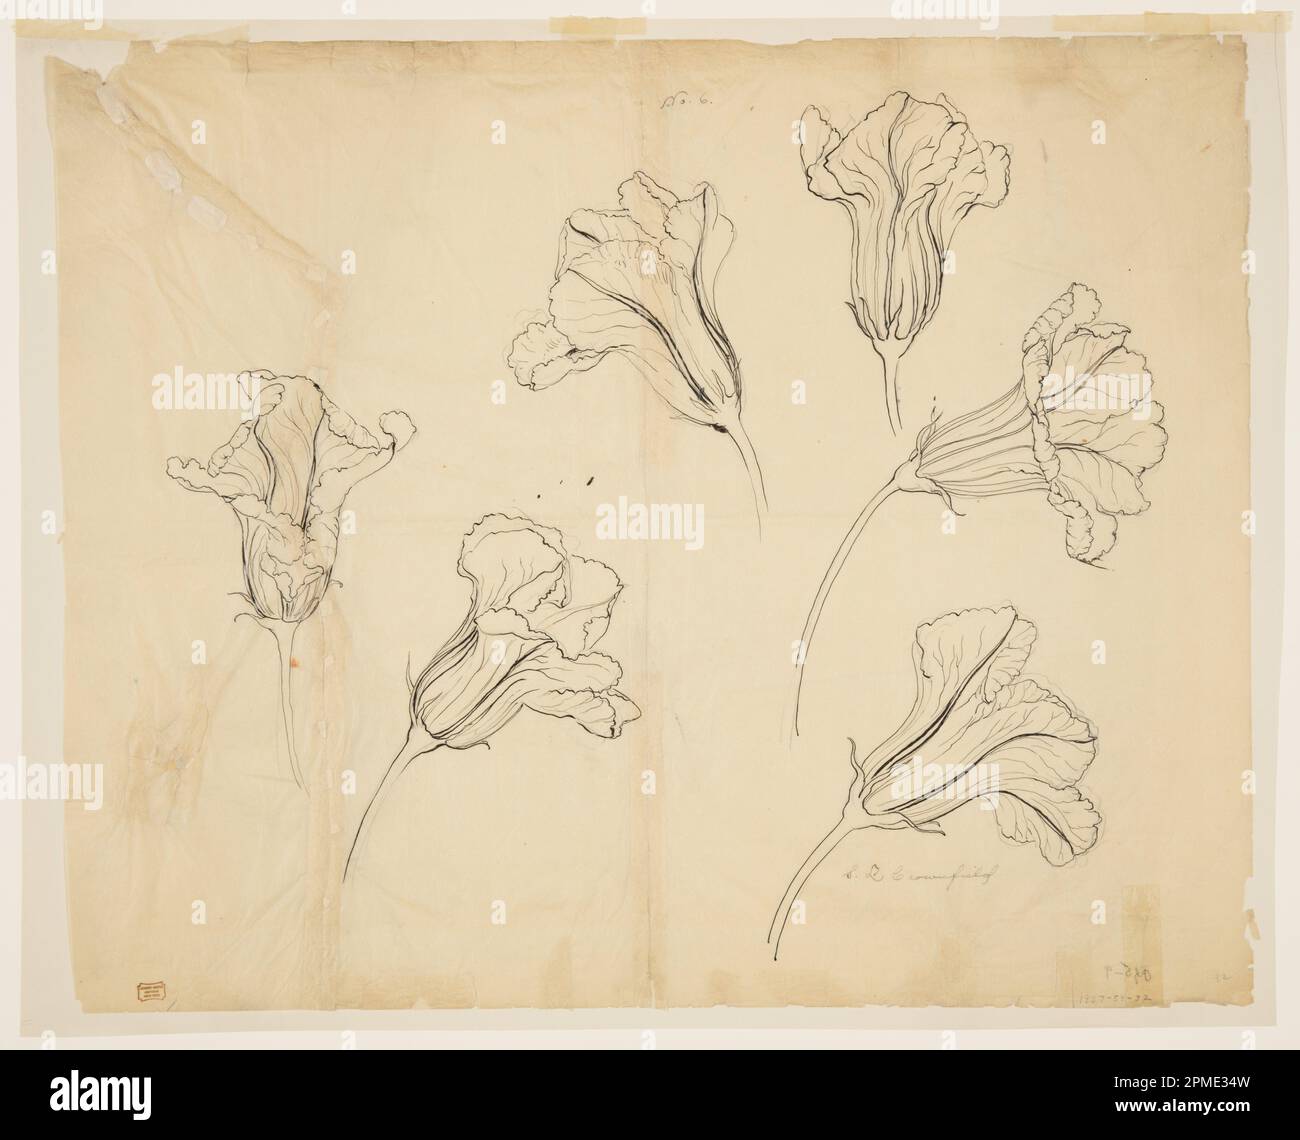 Drawing, Studies of Squash or Pumpkin Blossoms; Sophia L. Crownfield (American, 1862–1929); USA; graphite, pen and ink on tracing paper laid down; 48.3 x 59.2 cm (19 x 23 5/16 in.) Mat: 55.9 × 71.1 cm (22 × 28 in.) Stock Photo